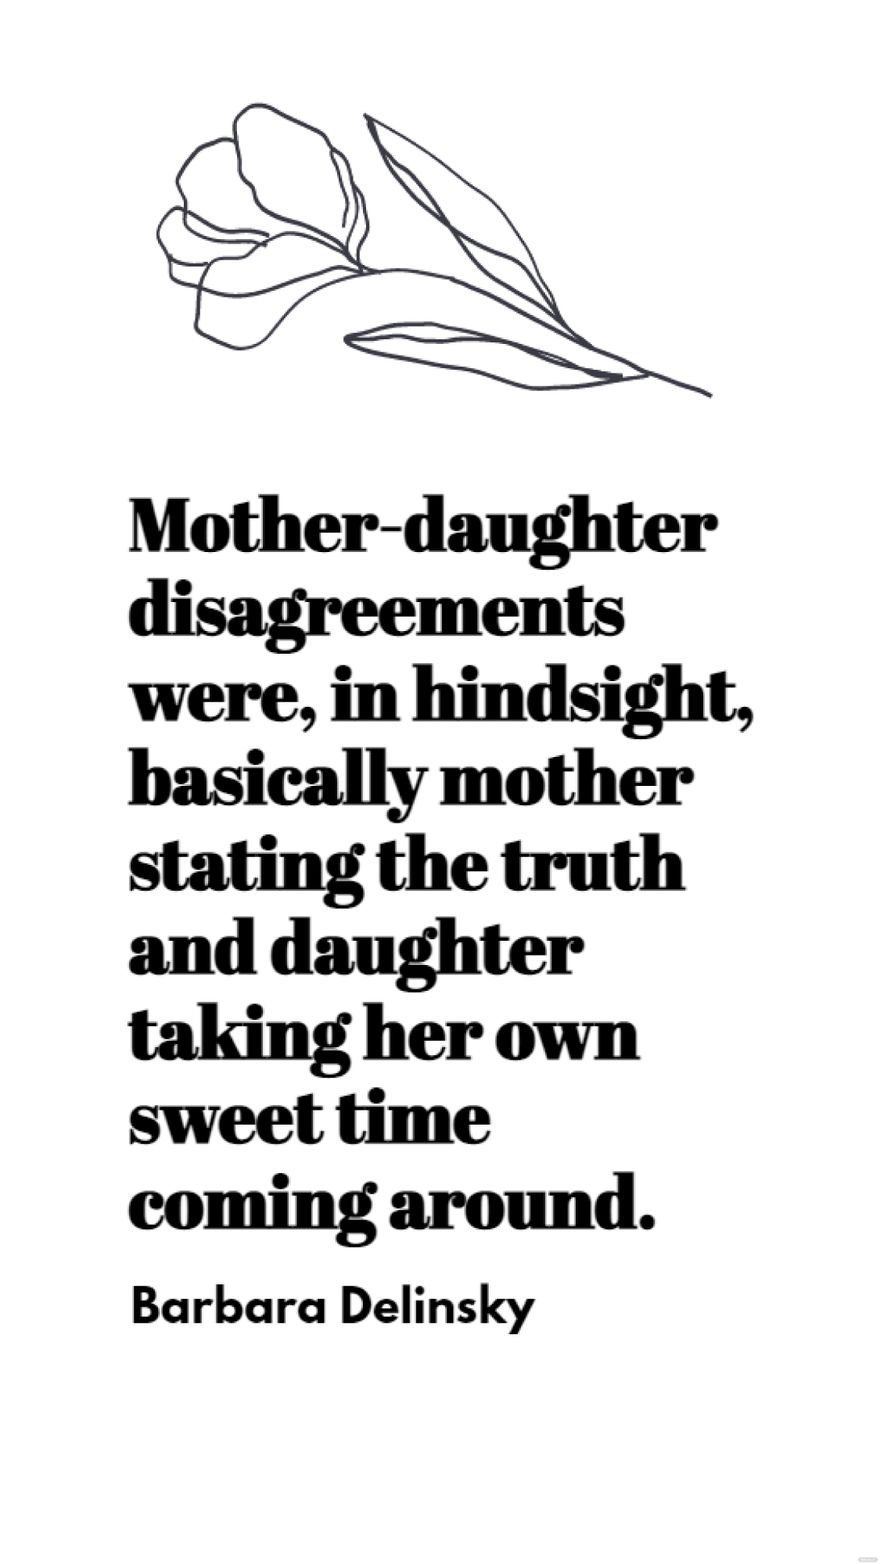 Barbara Delinsky - Mother-daughter disagreements were, in hindsight, basically mother stating the truth and daughter taking her own sweet time coming around.